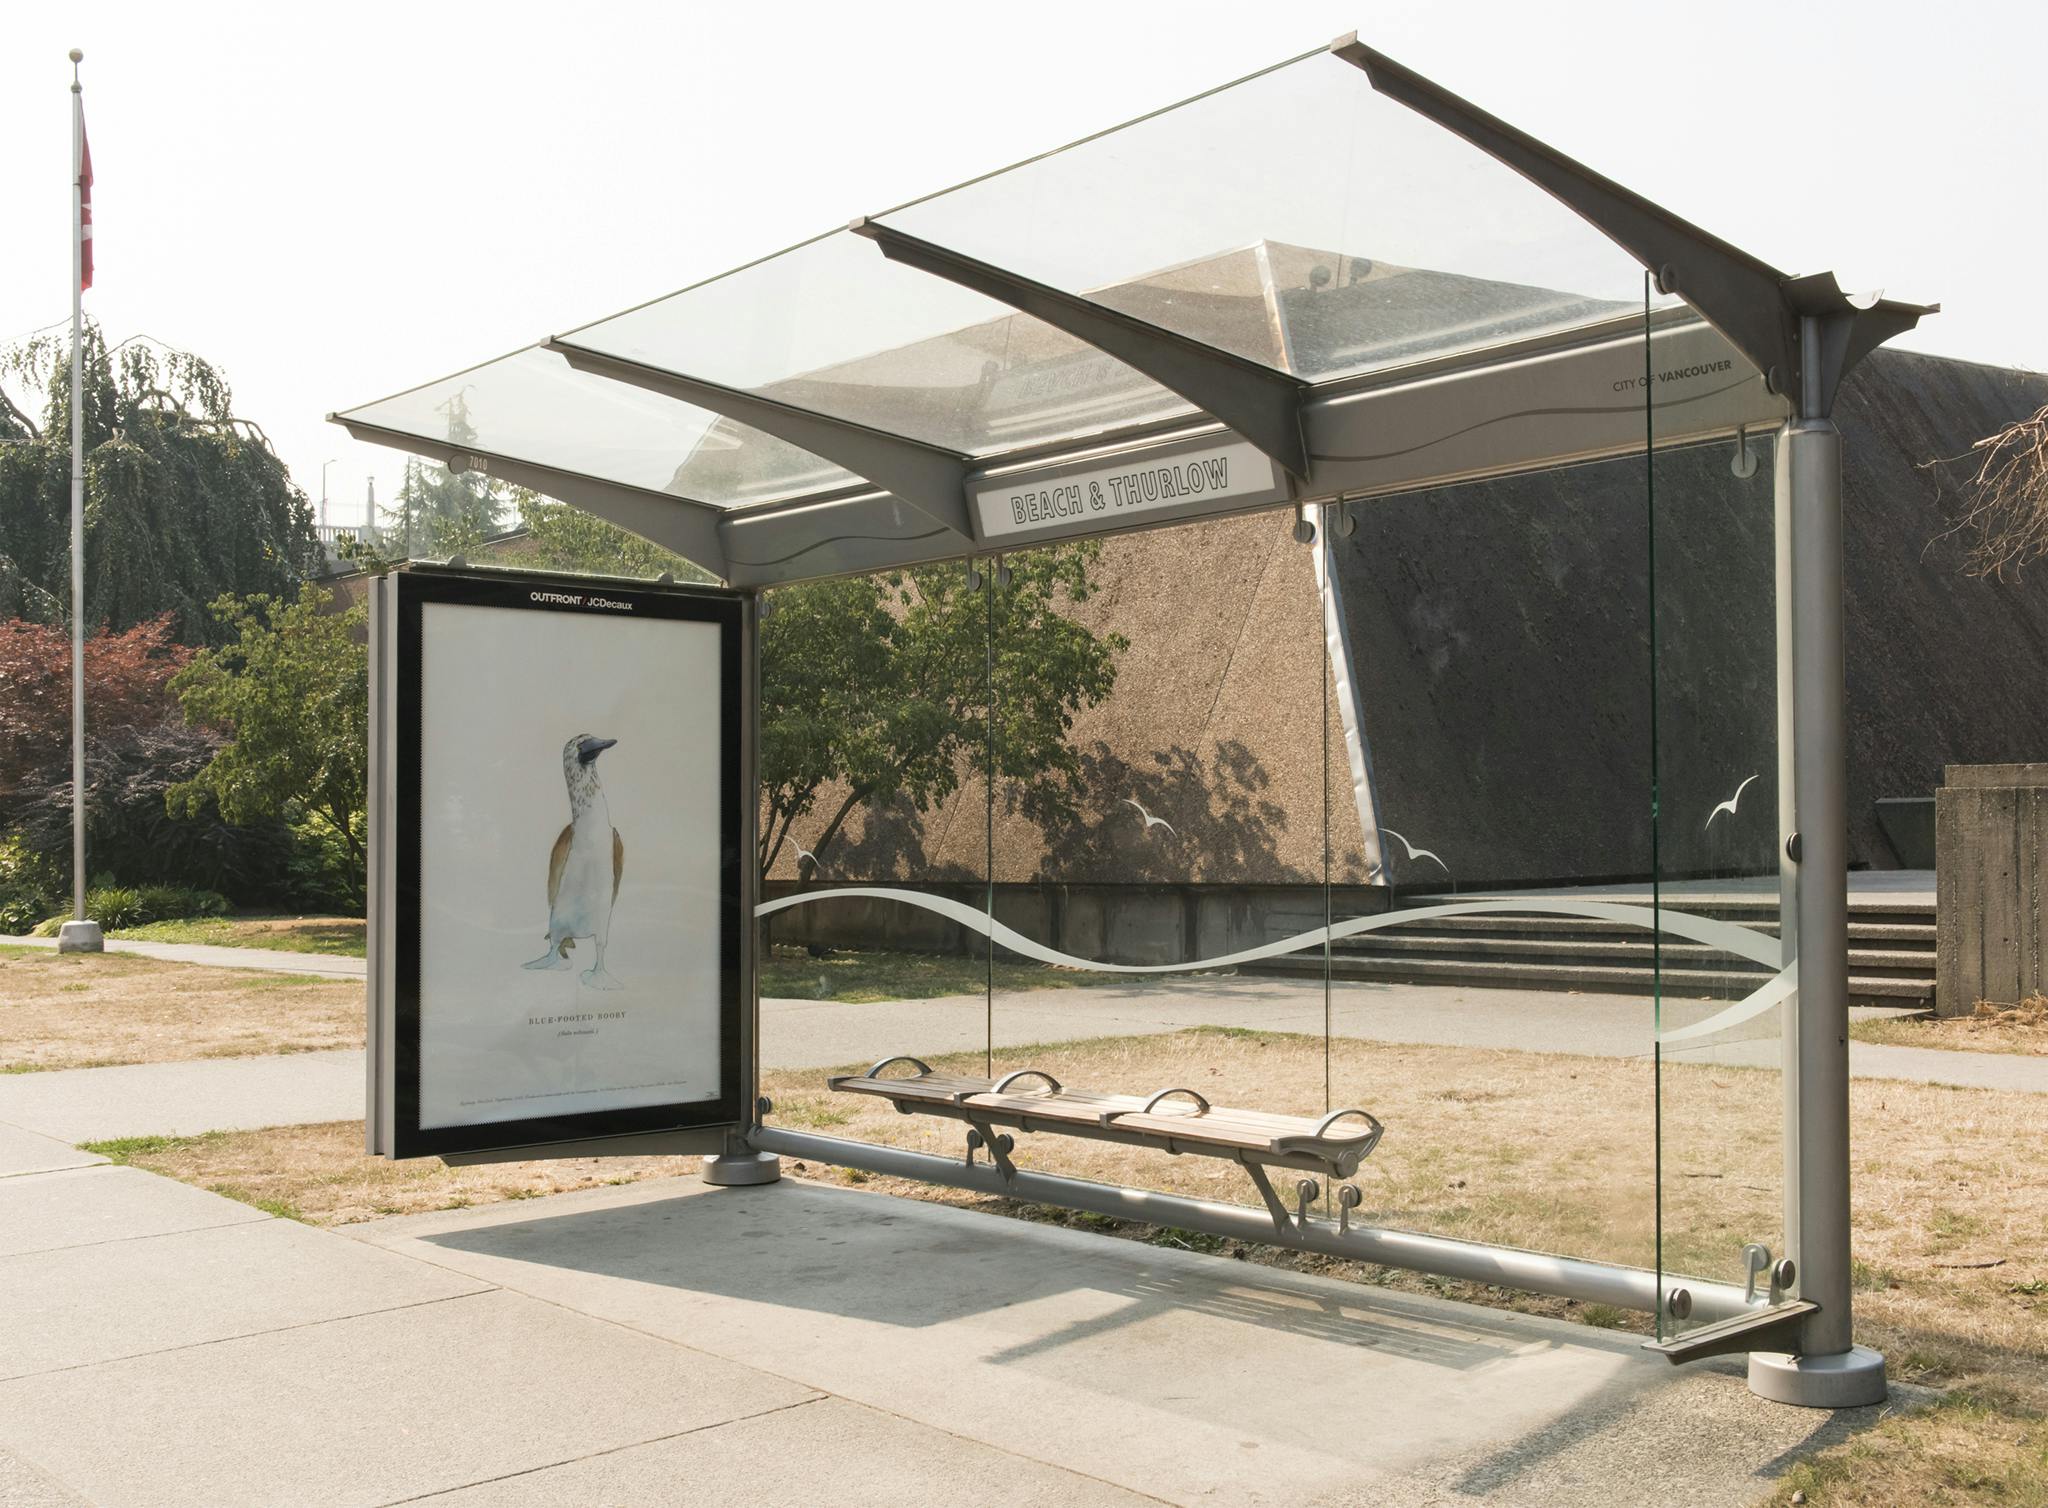 An image of a bus shelter with a large-scale watercolour print of a Blue Footed Booby. The print is installed where an advertisement would normally be displayed. 